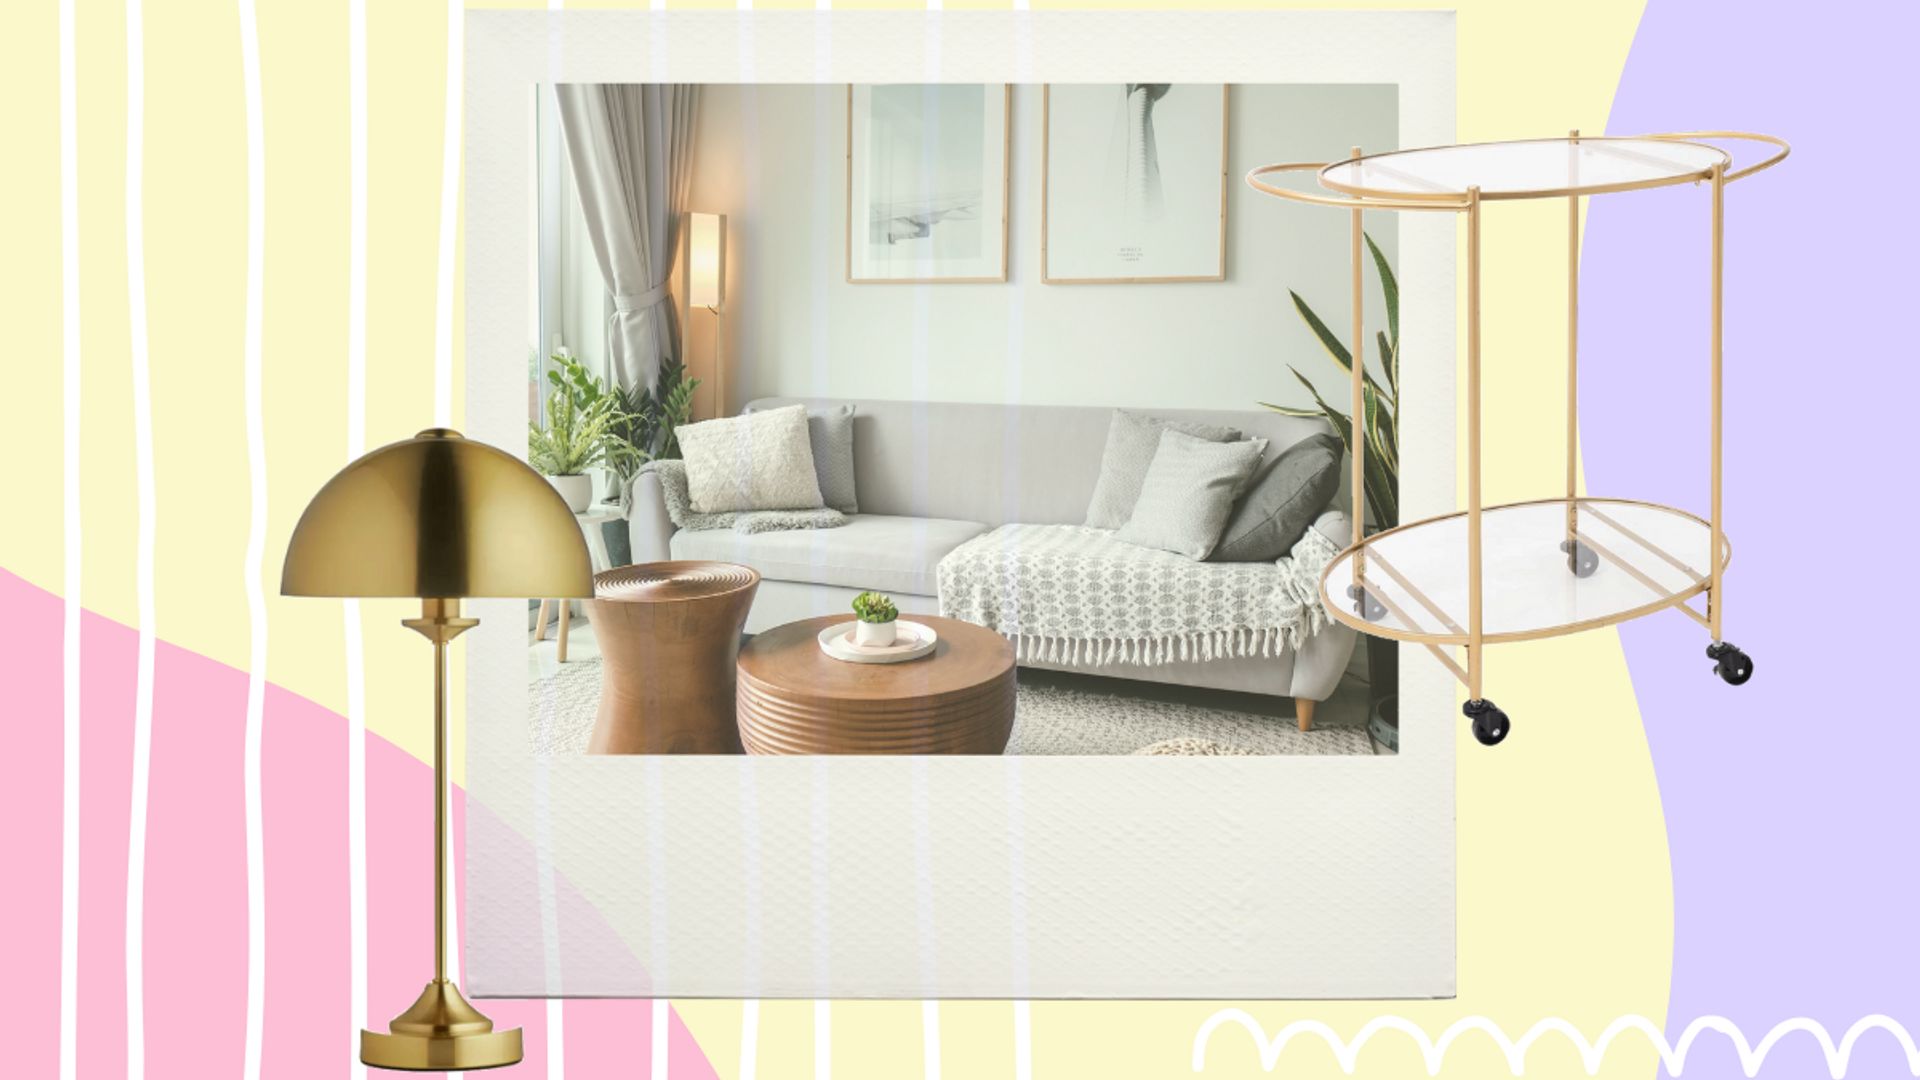 I'm an interiors expert and here's how to create a luxe home on a